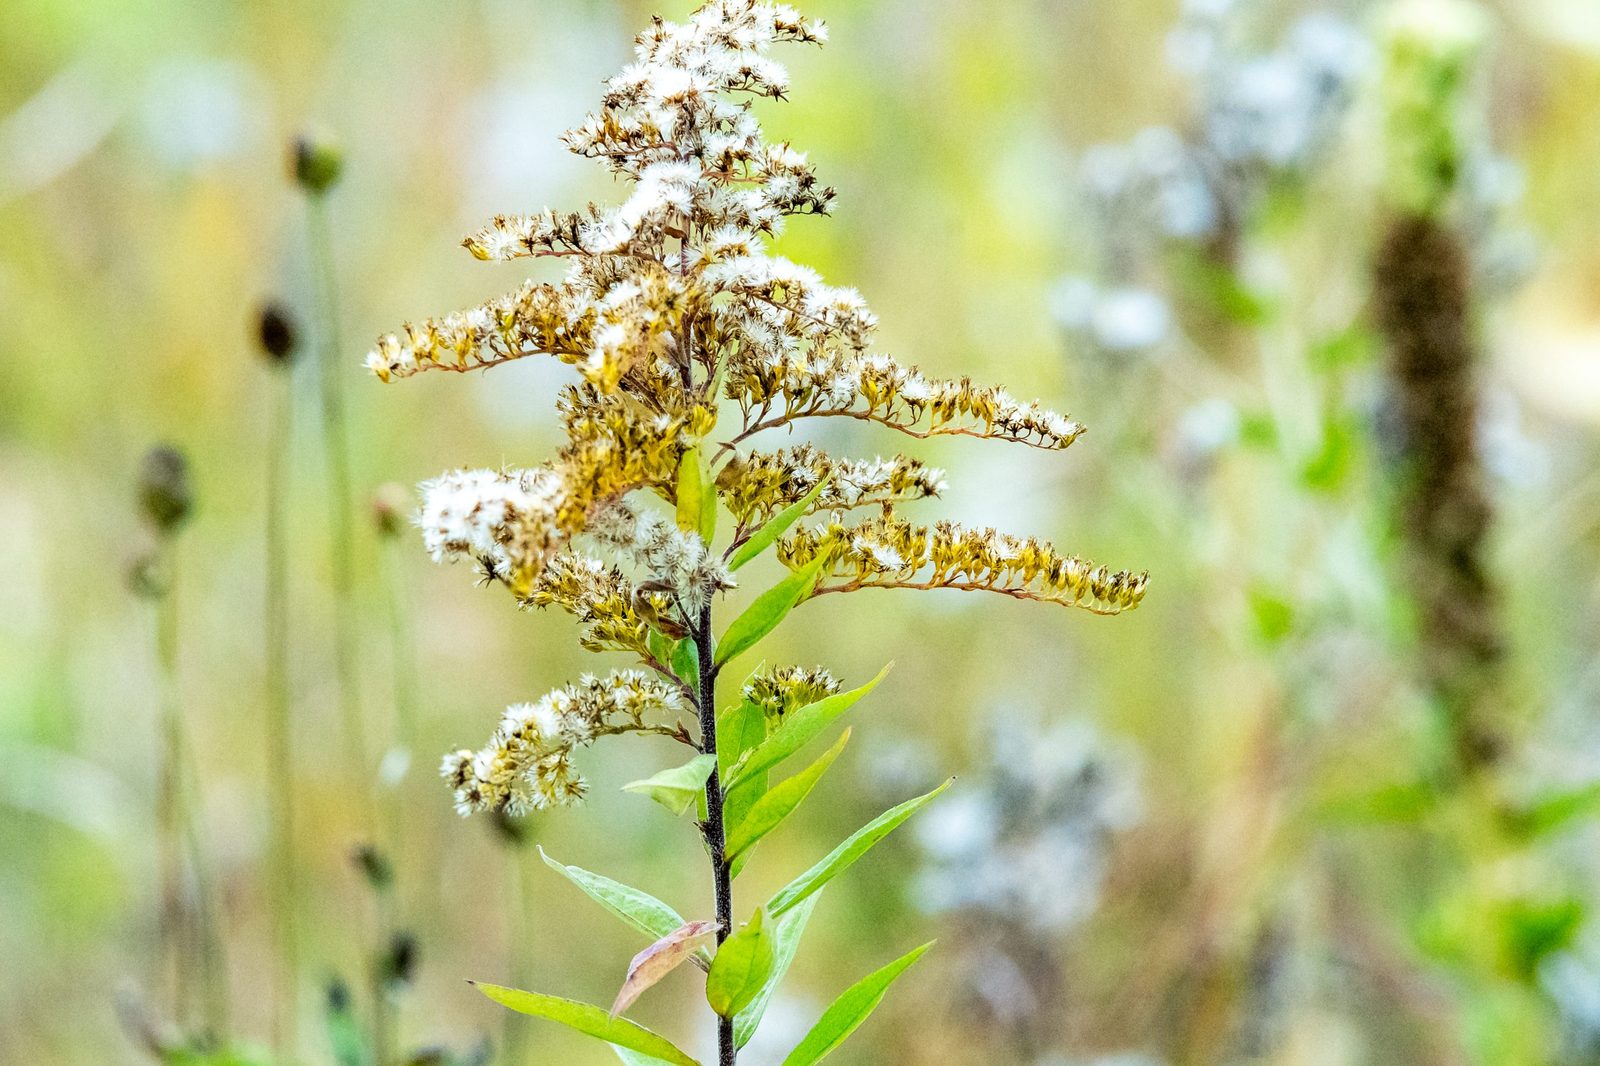 Close-up of a plant with white flowers.